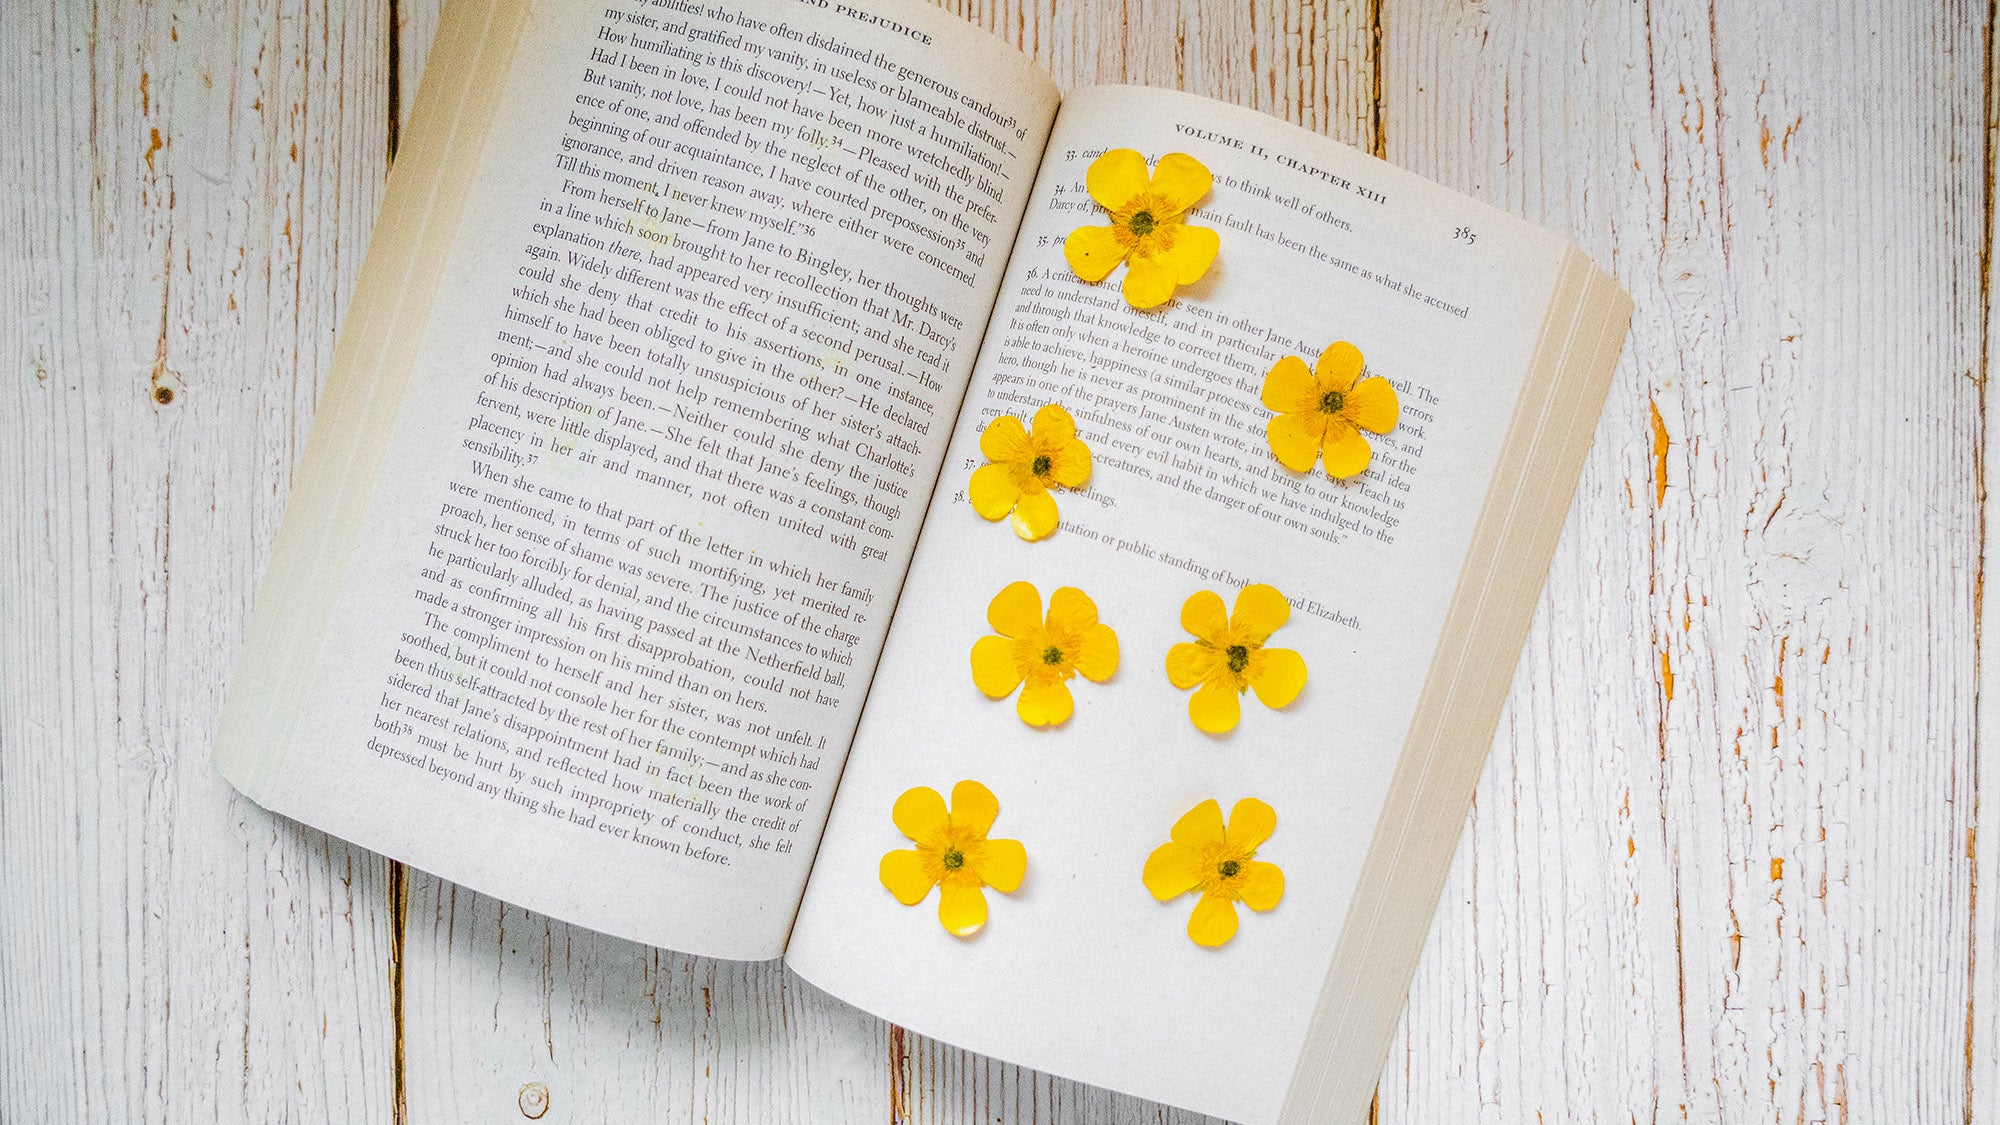 How to Press Flowers in a Book DIY Tutorial by Floral Neverland